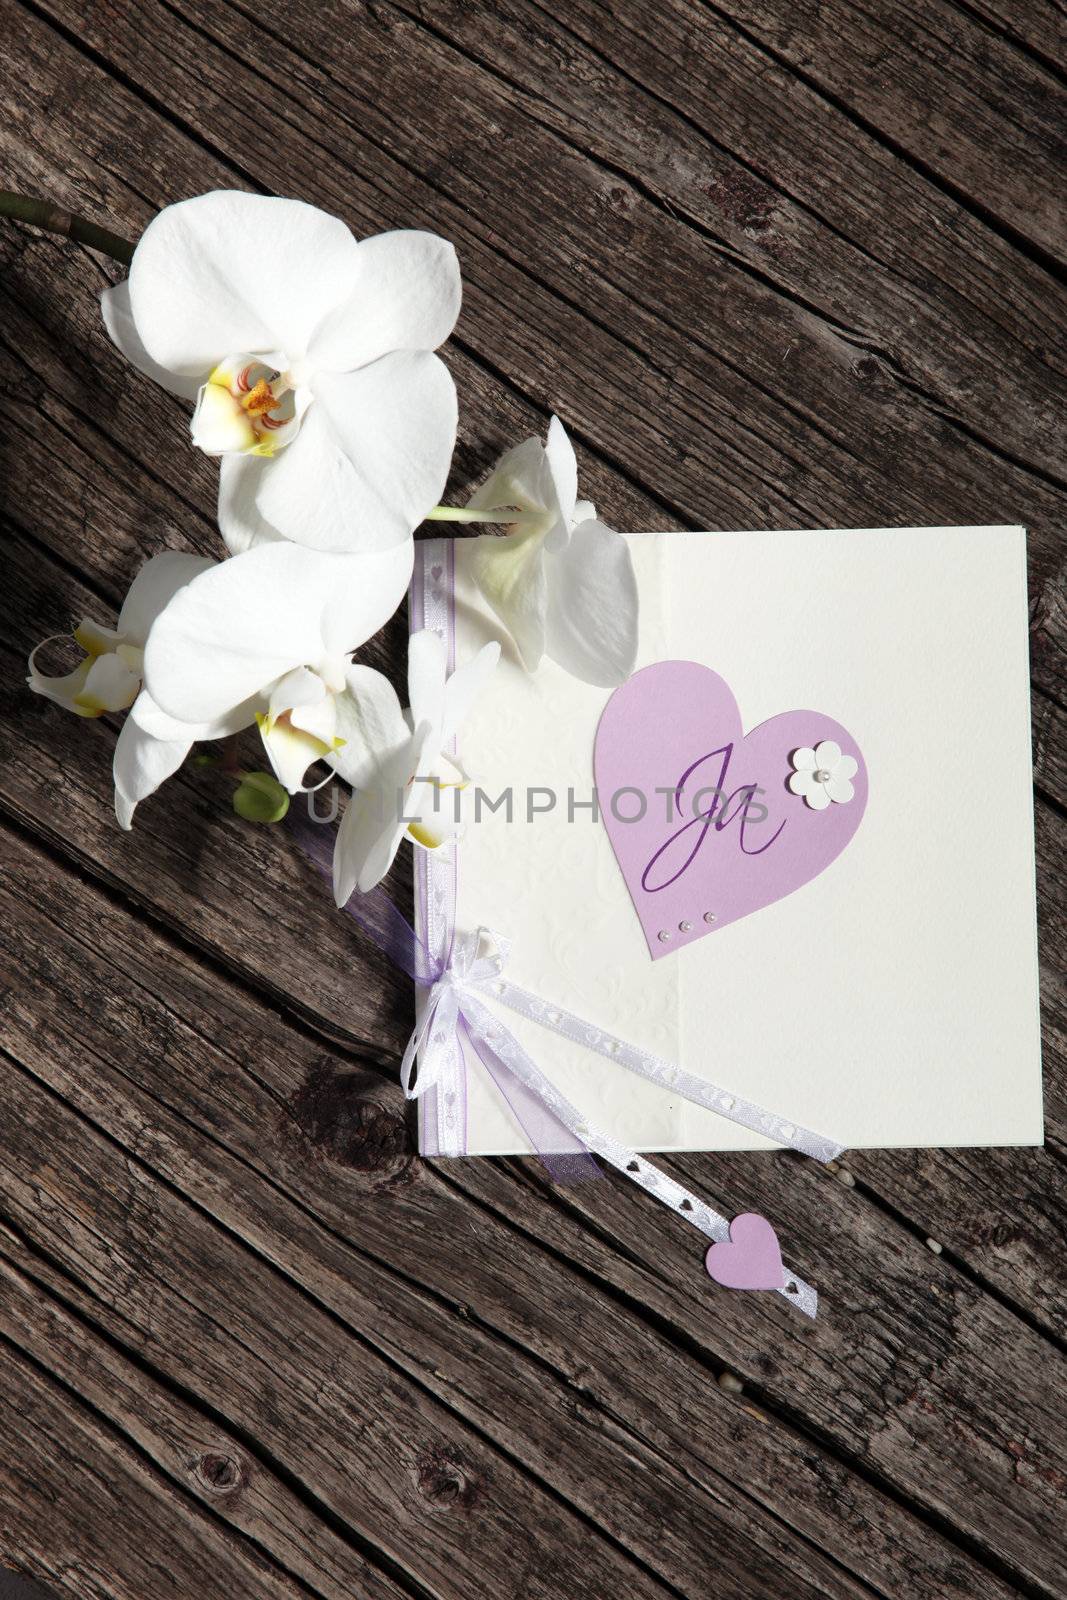 Pretty Valentine card with heart and flowers by Farina6000